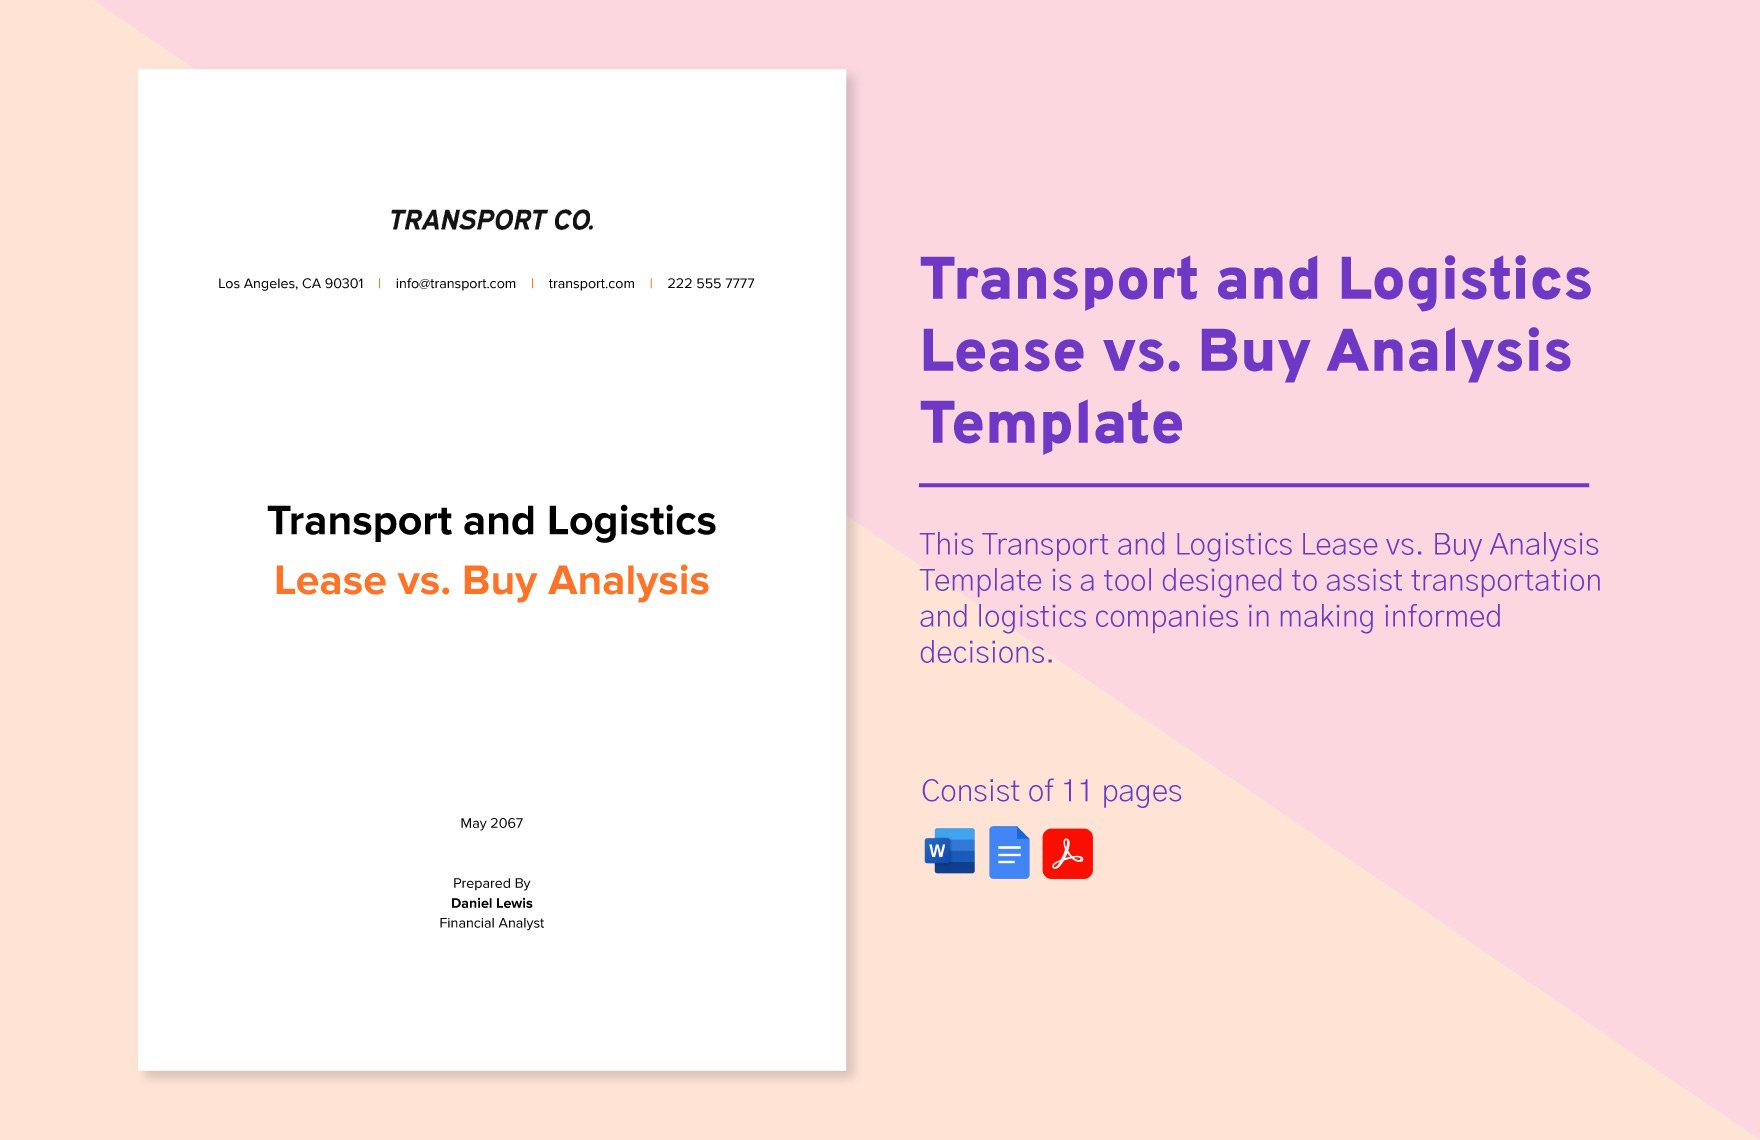 Transport and Logistics Lease vs. Buy Analysis Template